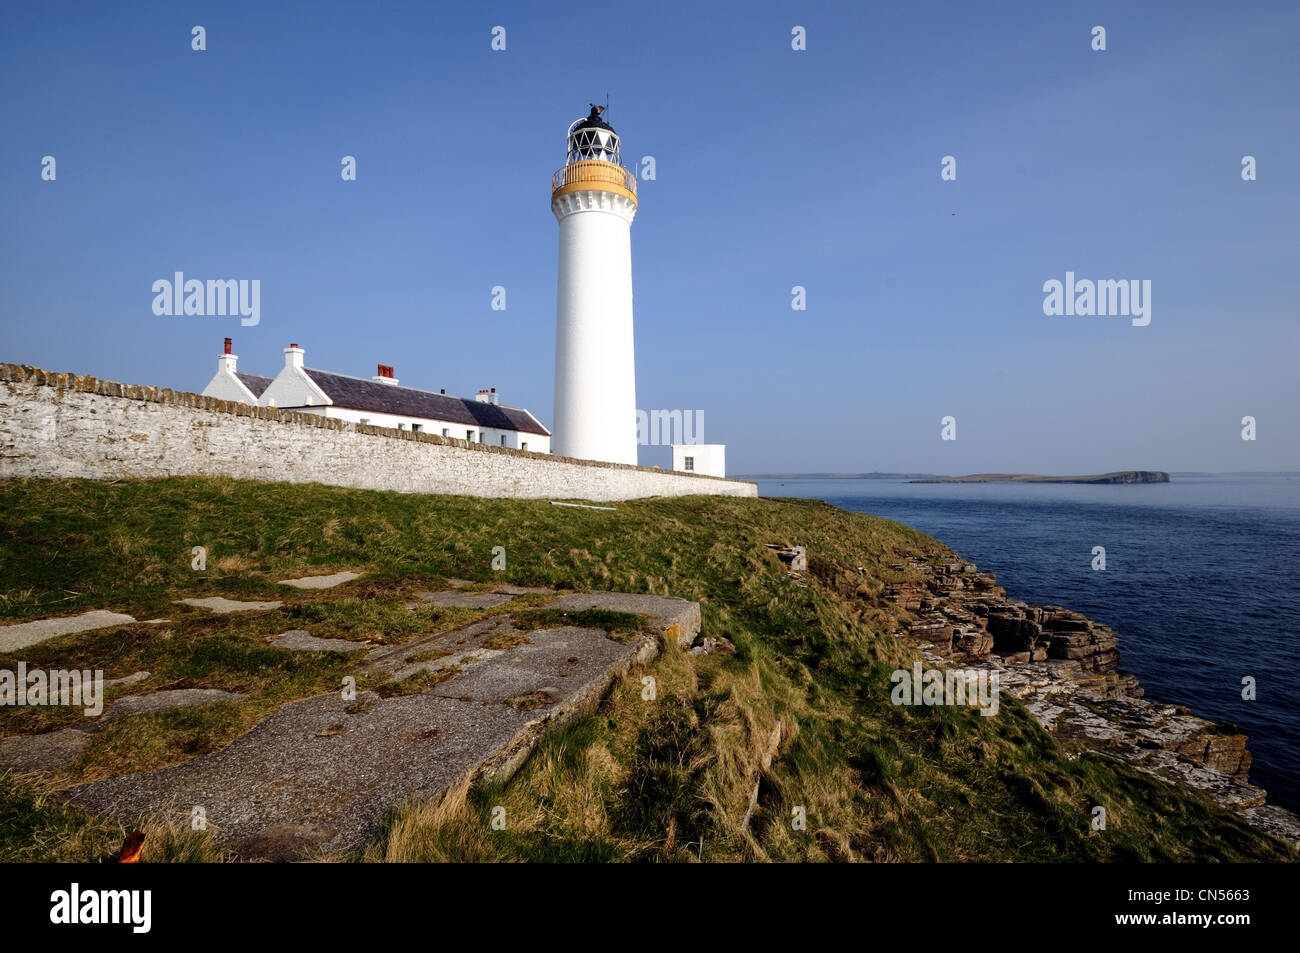 Cantick Head Lighthouse, Sud, Hoy, Orkney Banque D'Images